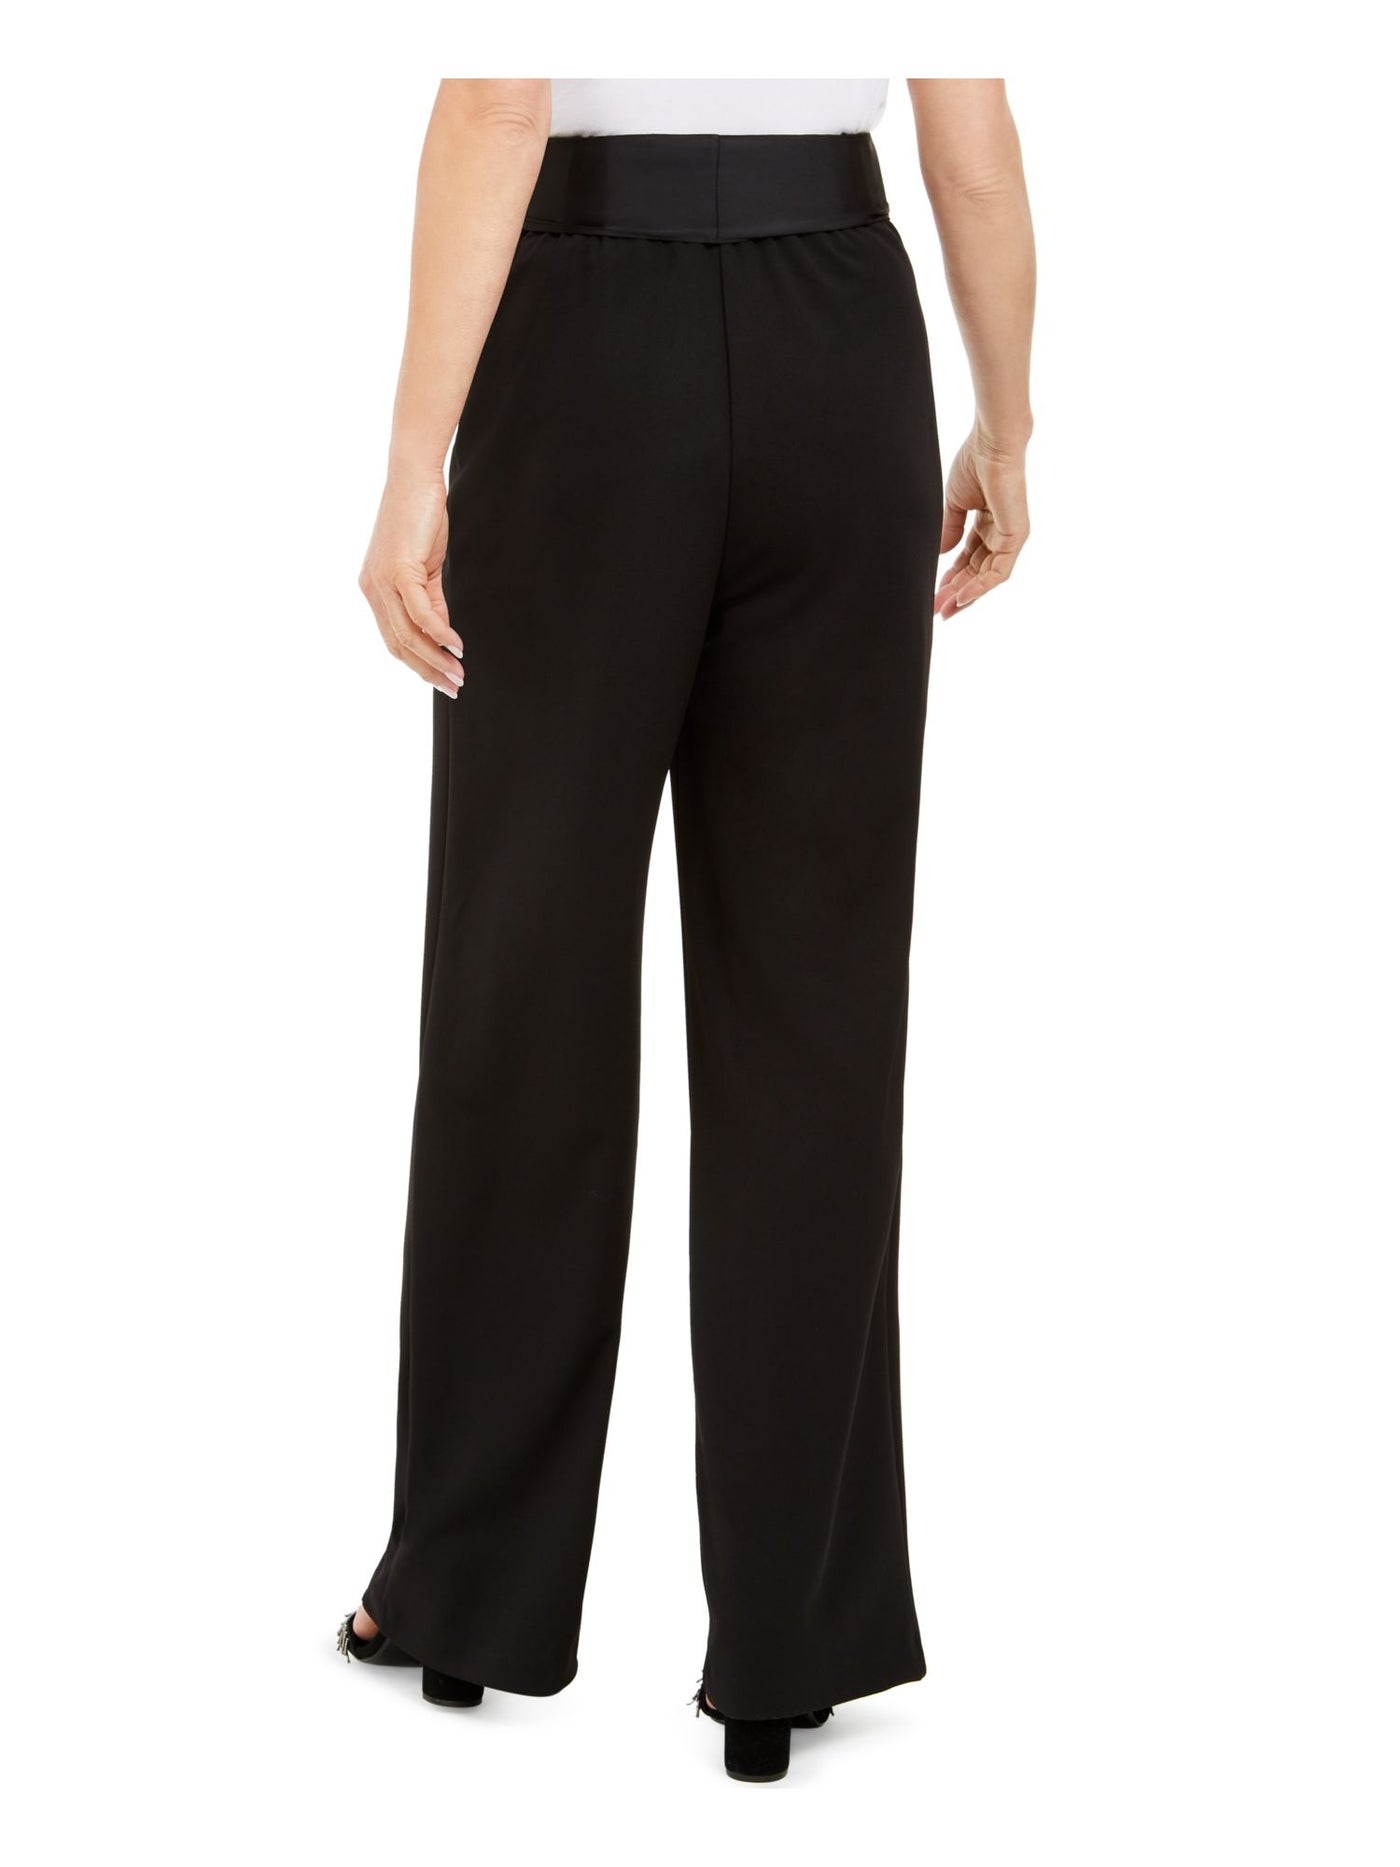 ADRIANNA PAPELL Womens Black Zippered Wear To Work Wide Leg Pants Petites 0P